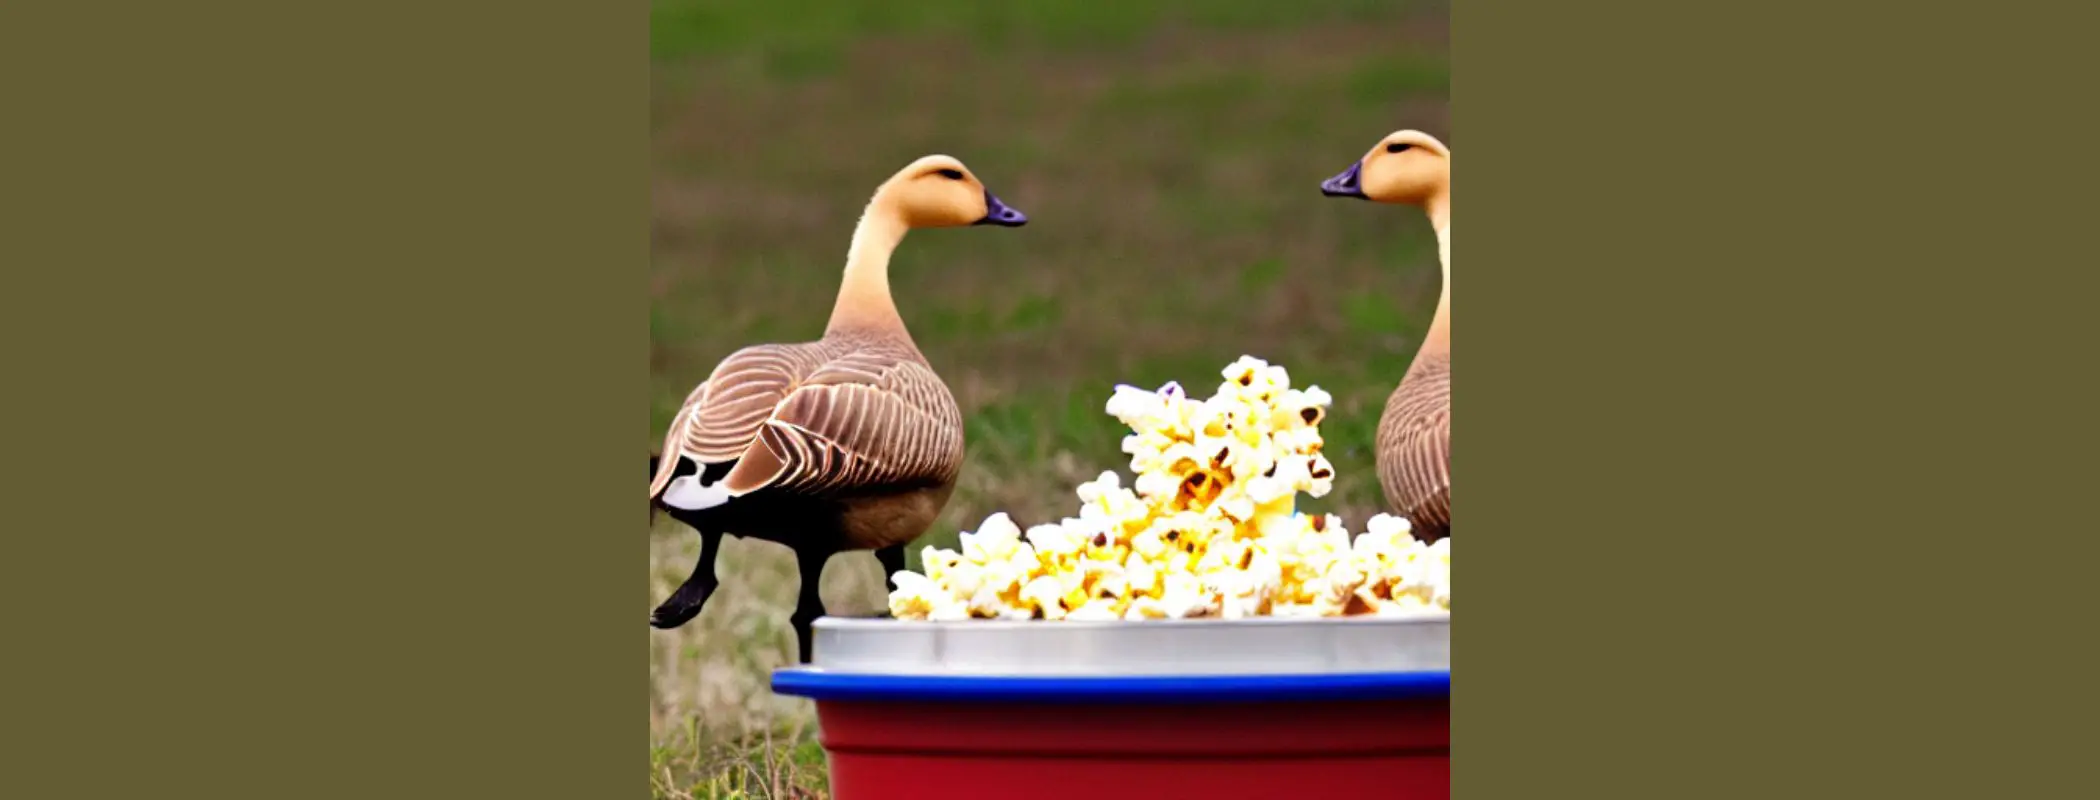 can geese eat popcorn?